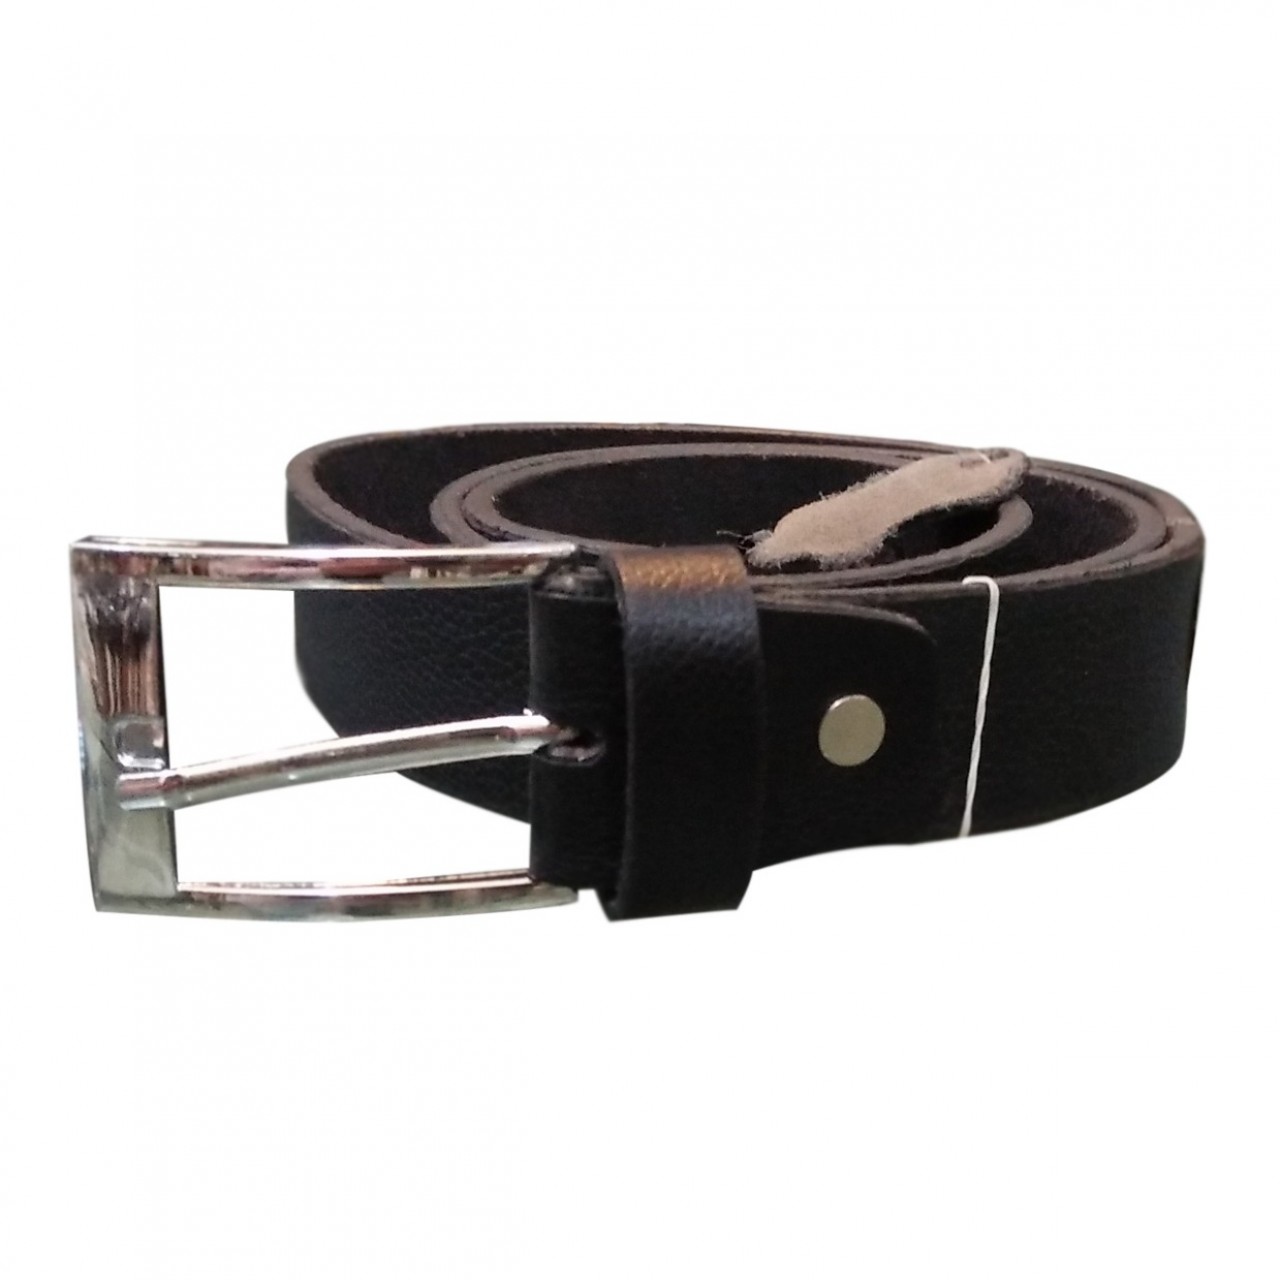 Top Quality Black Leather Belt With Chrome Buckle For Men